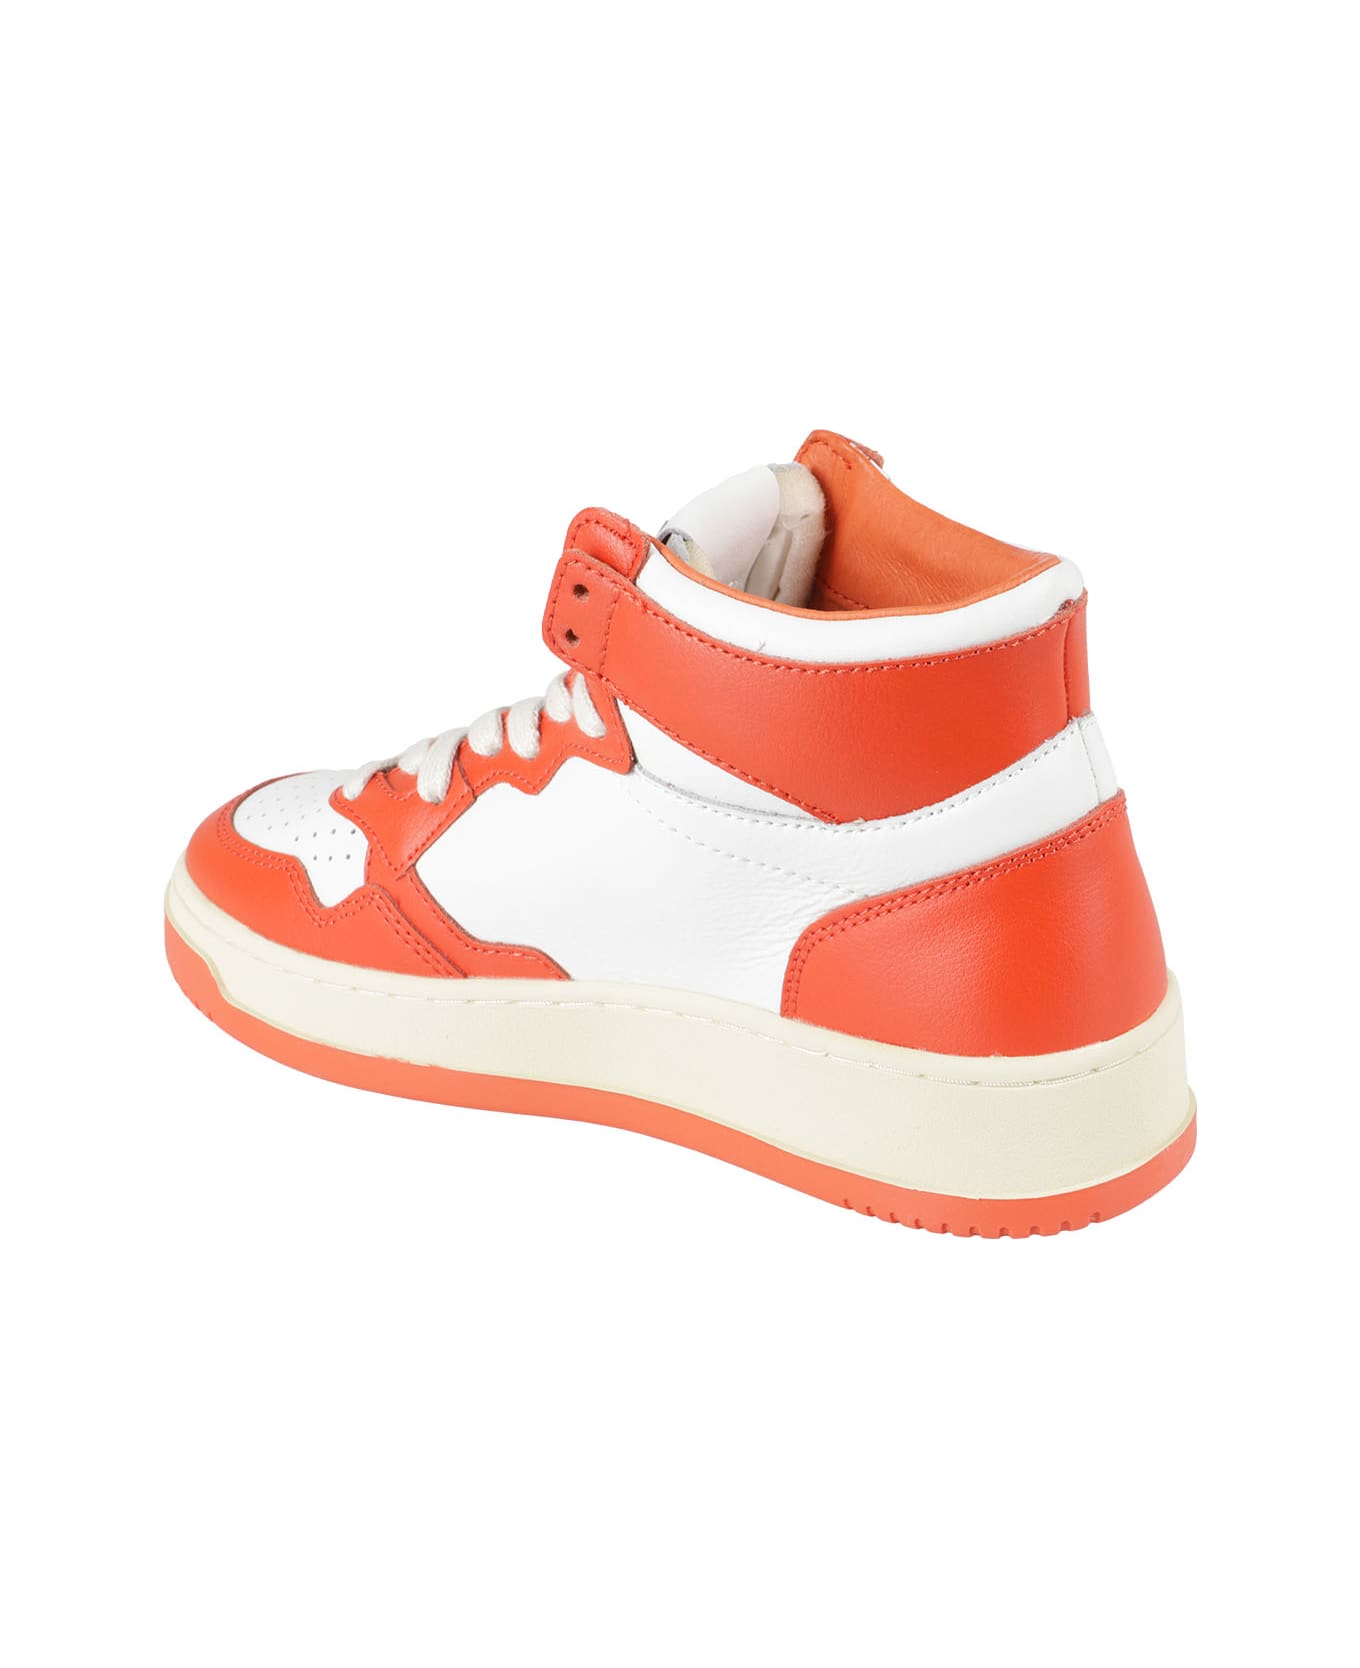 Autry Medalist Mid Sneakers Aumw Wb21 - Leat Tangerine スニーカー